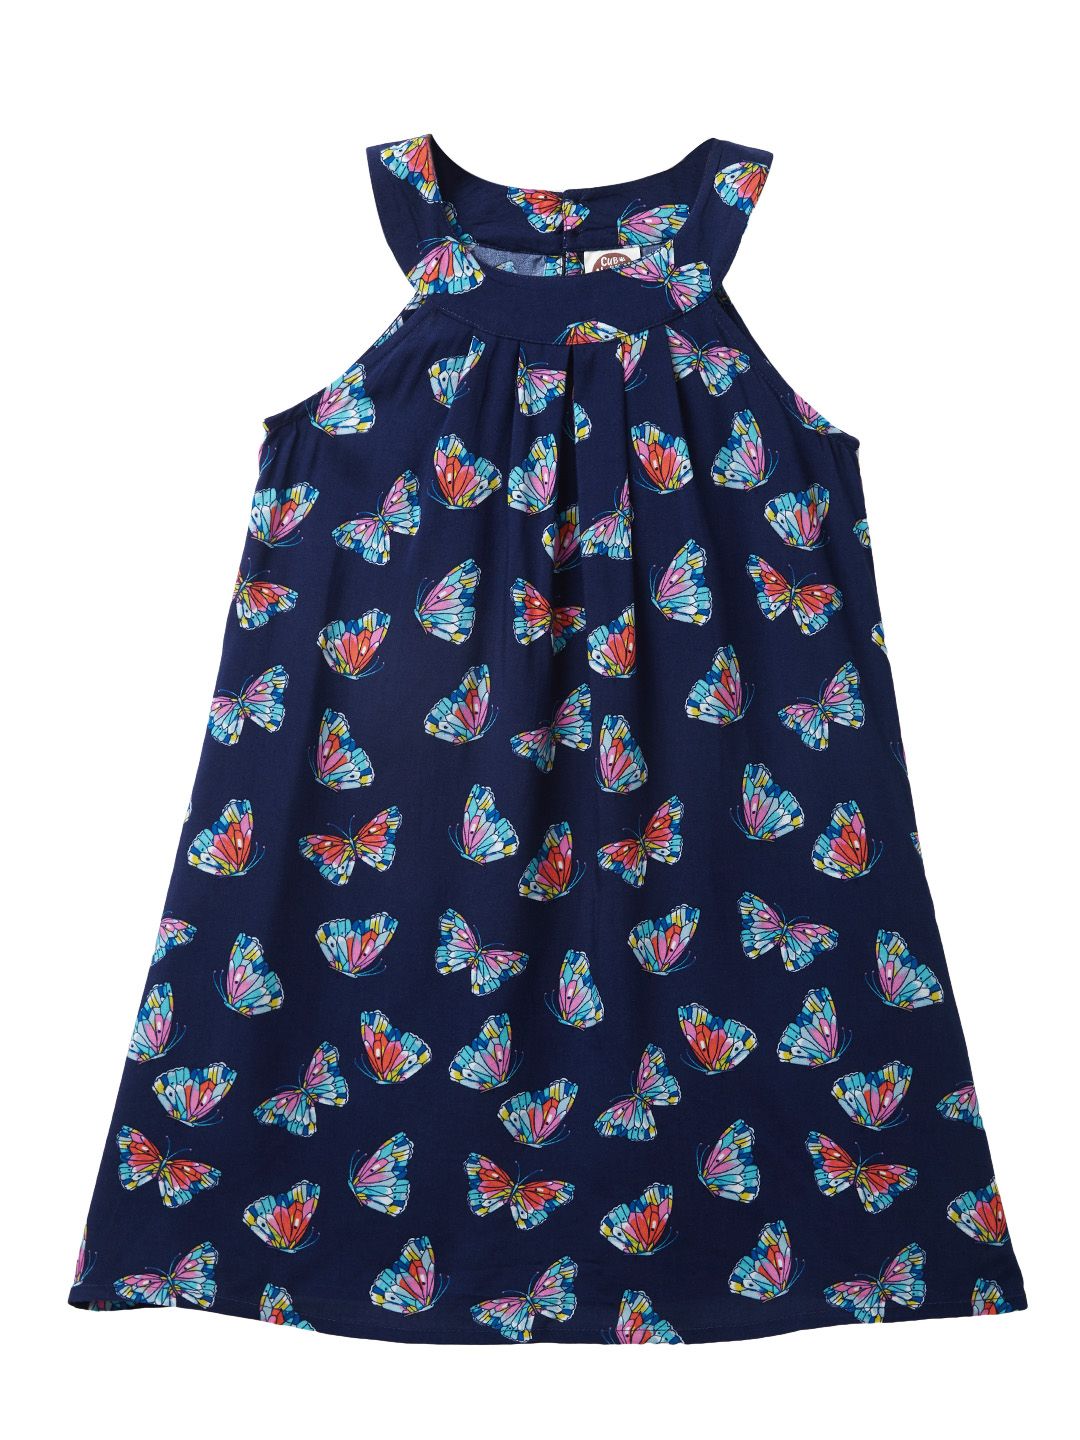 Buy Blue Halter Neck Dress for 12 Year Girl Online from Cub McPaws